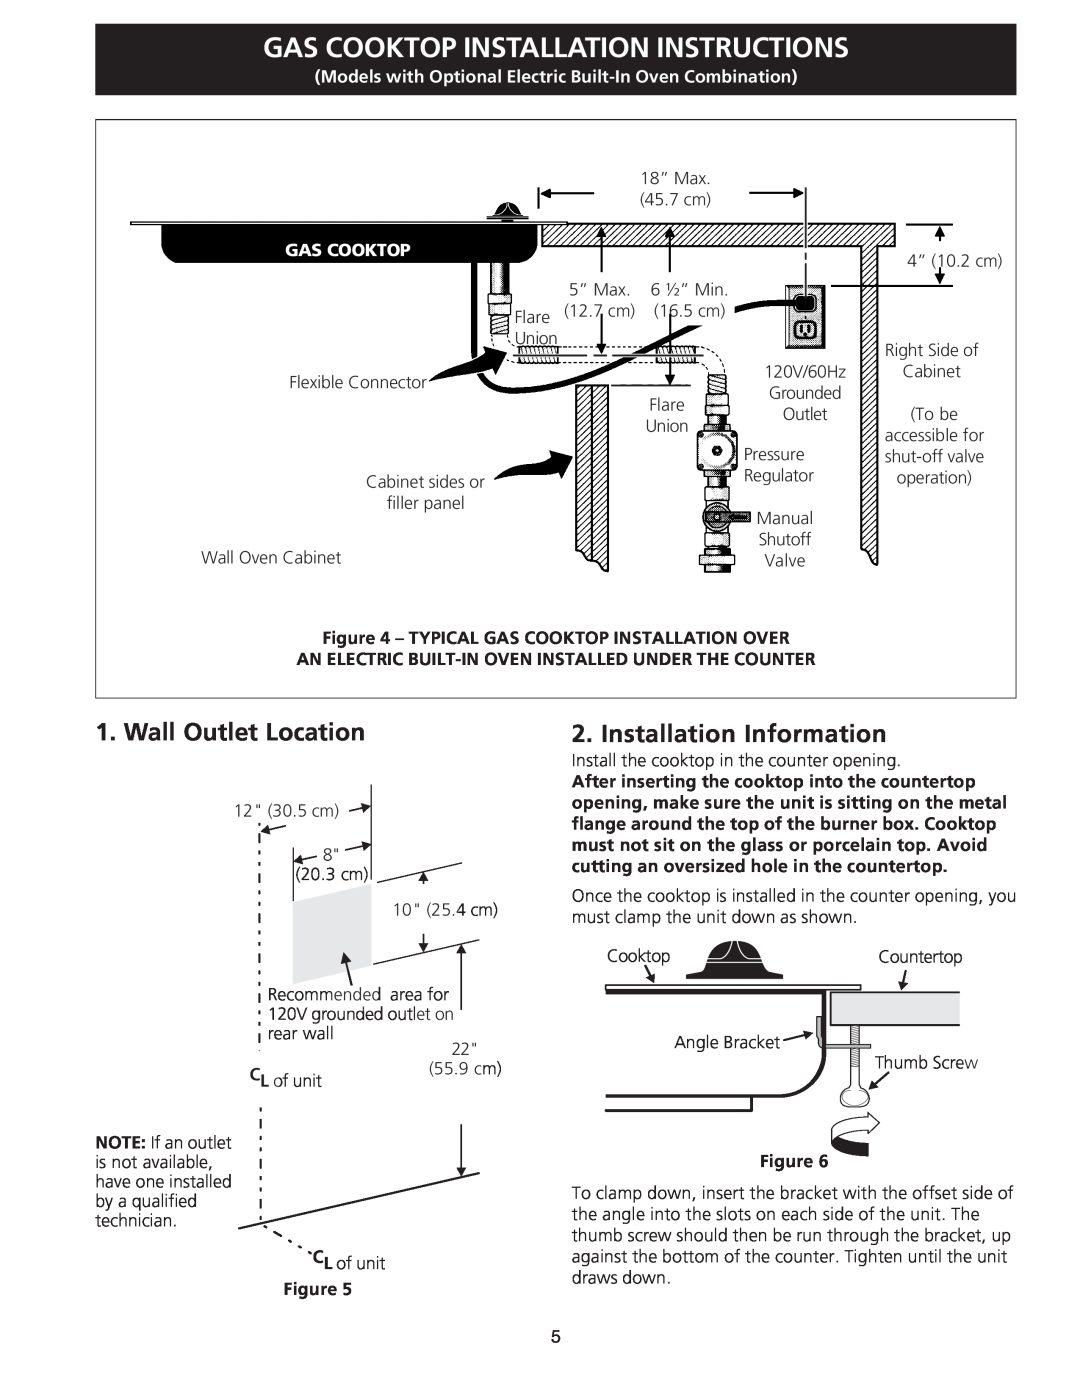 Frigidaire 318201463 (0711) Wall Outlet Location, Installation Information, Gas Cooktop Installation Instructions 